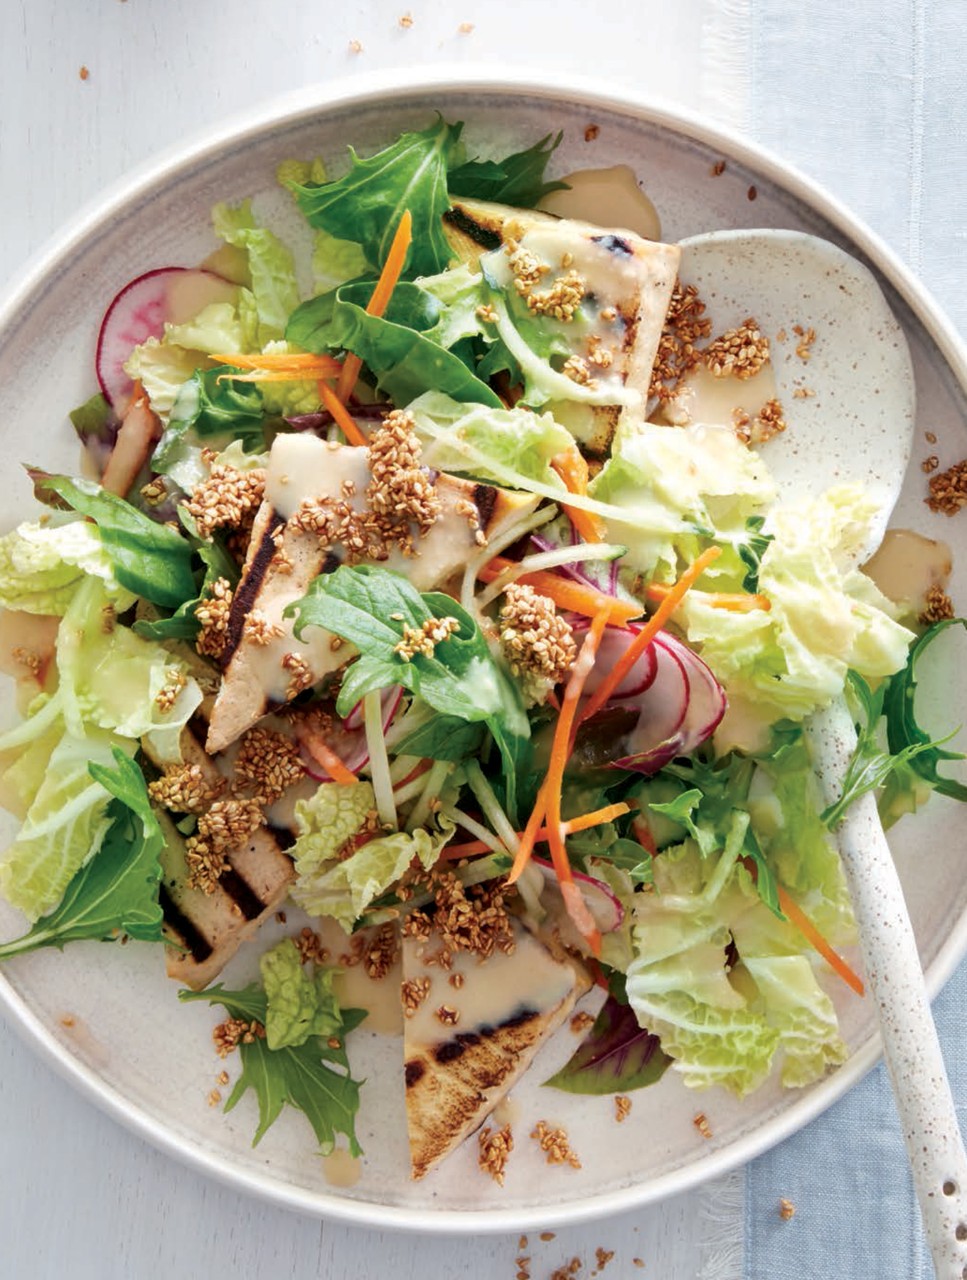 Asian Greens Salad with Grilled Tofu, Miso Dressing & Soy-Glazed Sesame Seeds